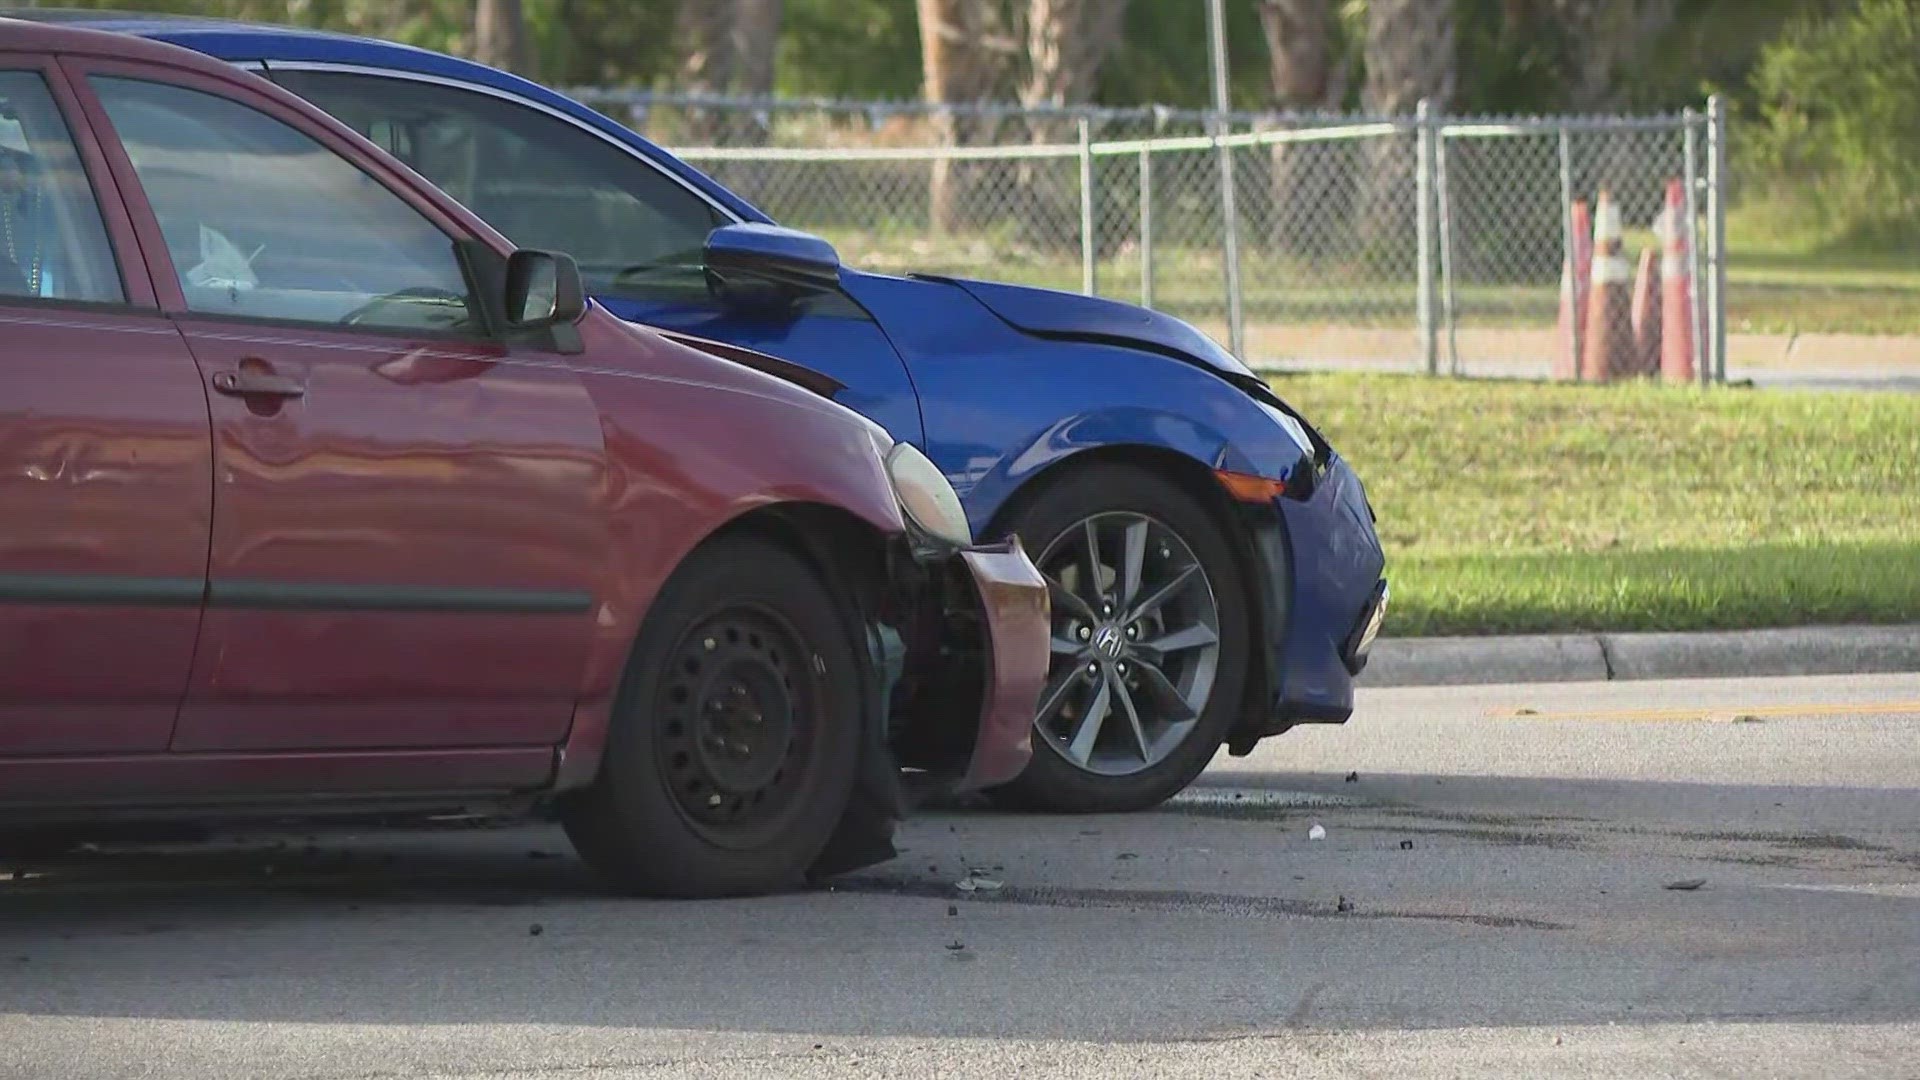 On Monday night, a woman died after she was hit by three cars at the intersection. Tuesday, when First Coast News was on scene, another crash happened.